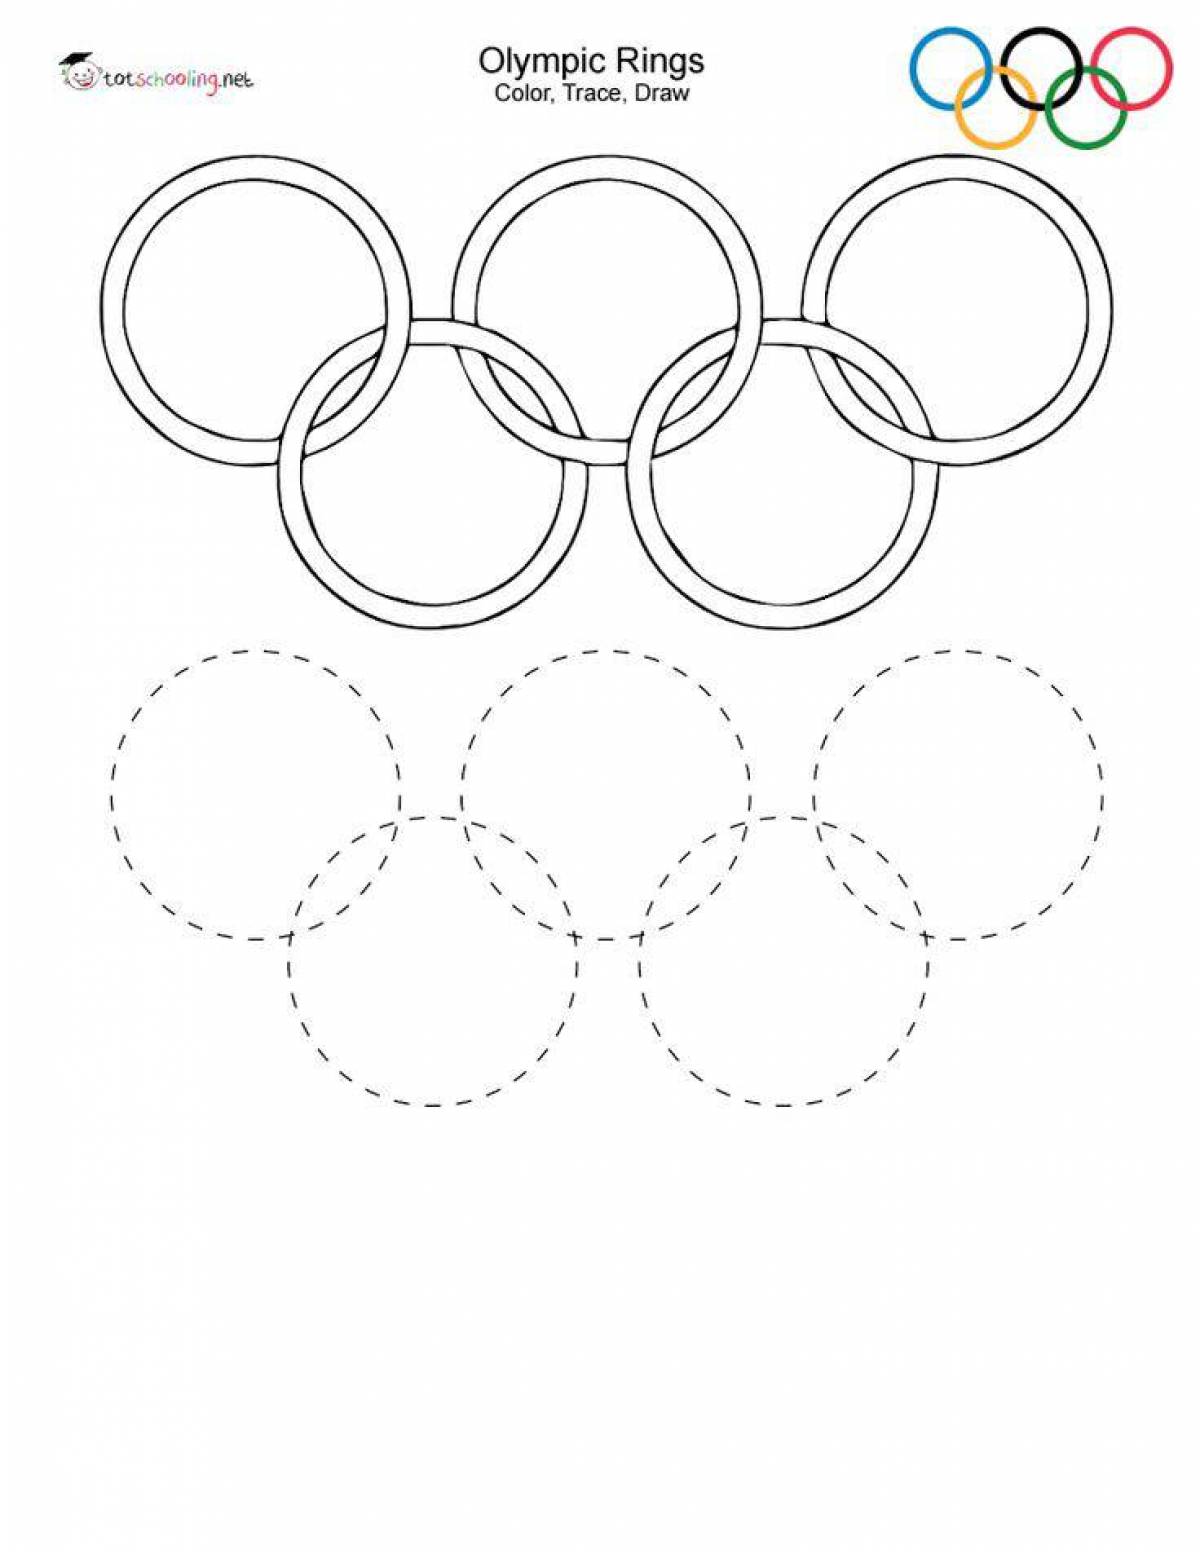 Coloring page glowing olympic rings